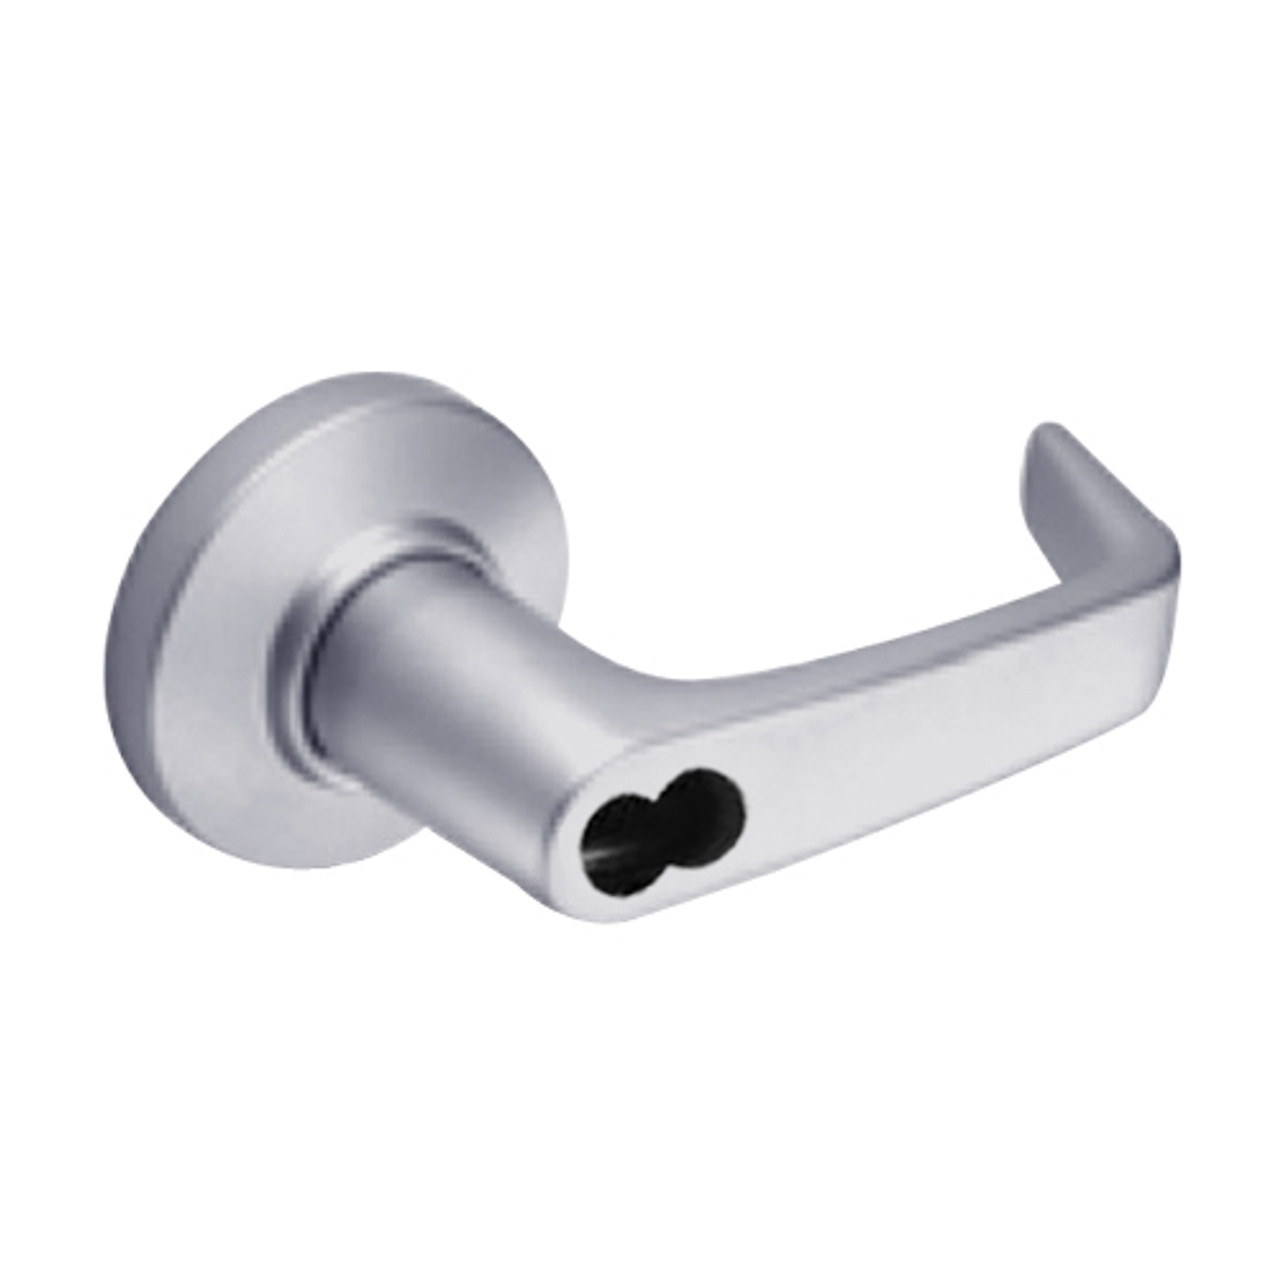 9K57W15CSTK626 Best 9K Series Institutional Cylindrical Lever Locks with Contour Angle with Return Lever Design Accept 7 Pin Best Core in Satin Chrome